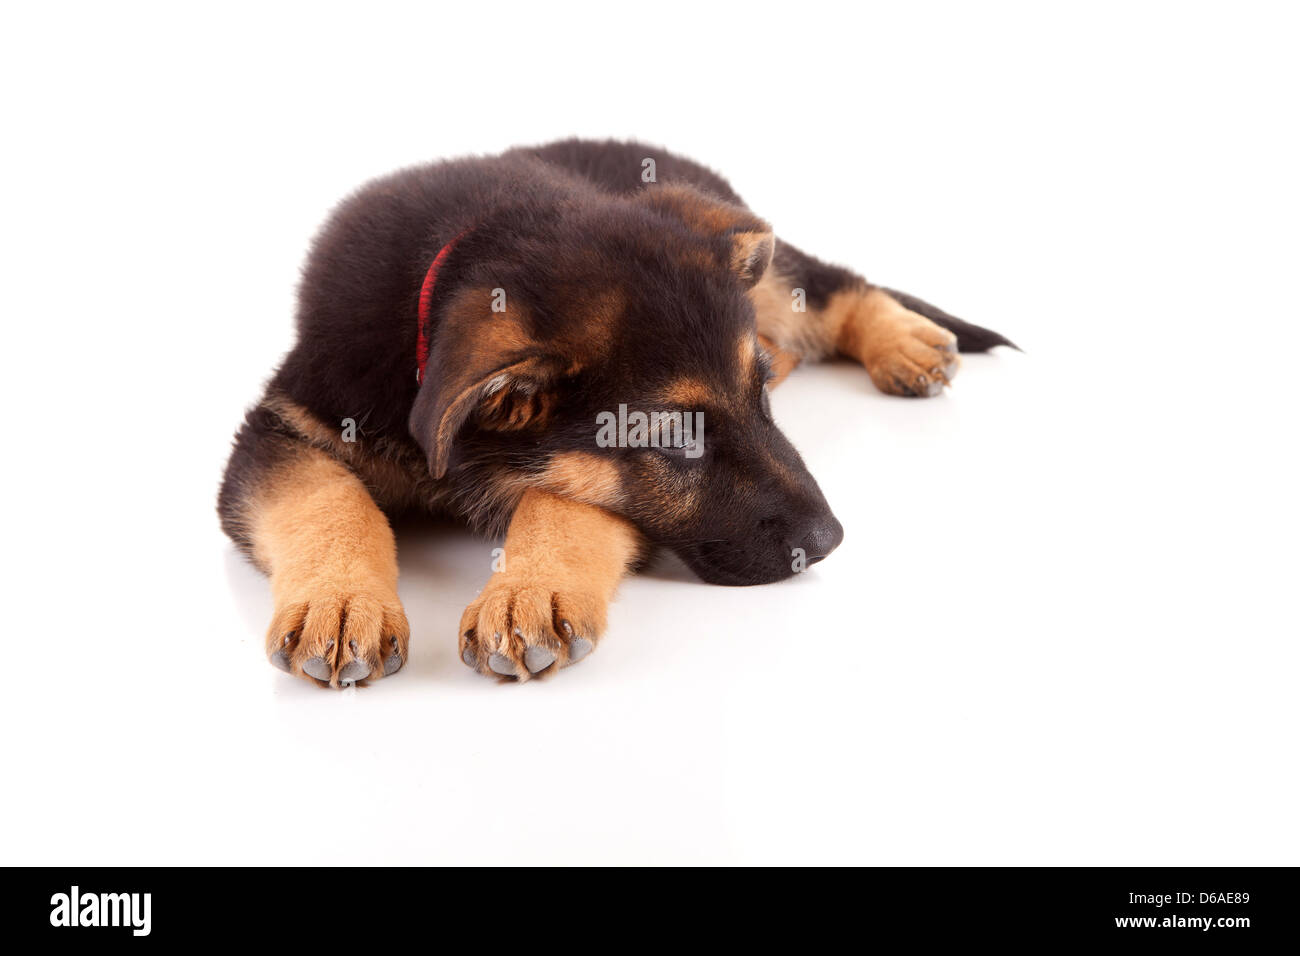 Baby german shepherd dog, isolated over a white background Stock Photo